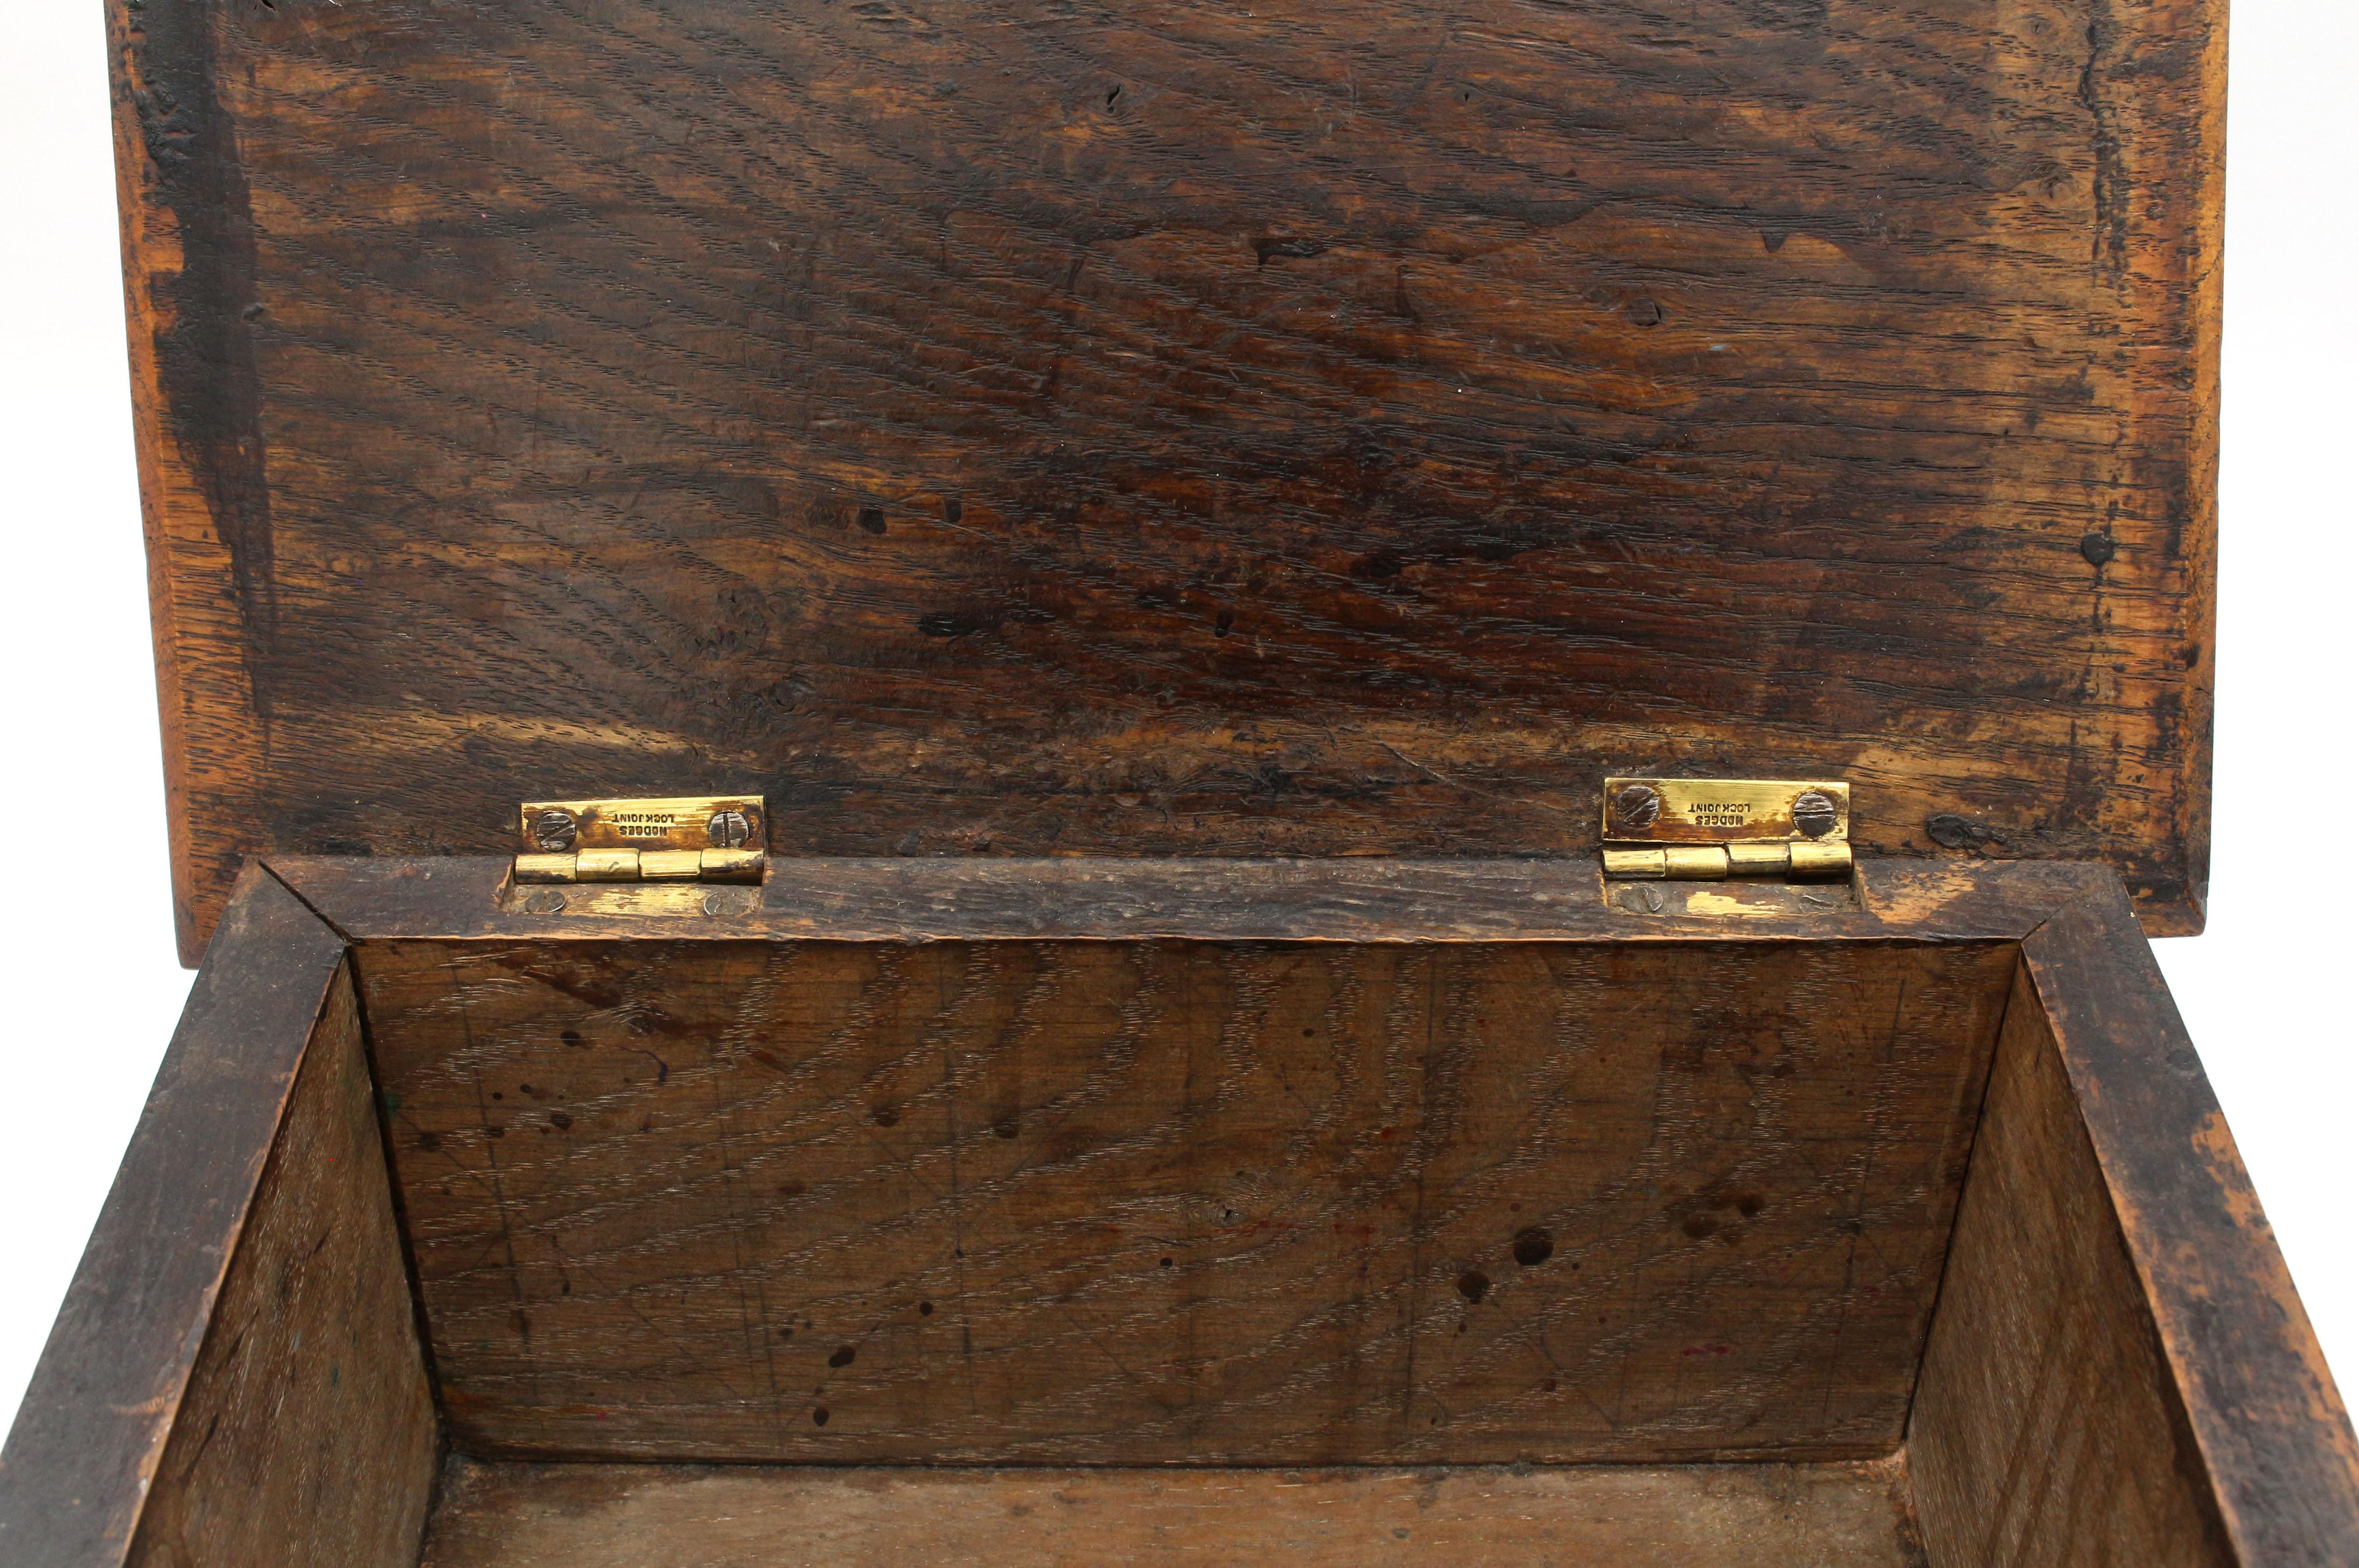 English Gothic Revival Document Box, c.1860-80 For Sale 2